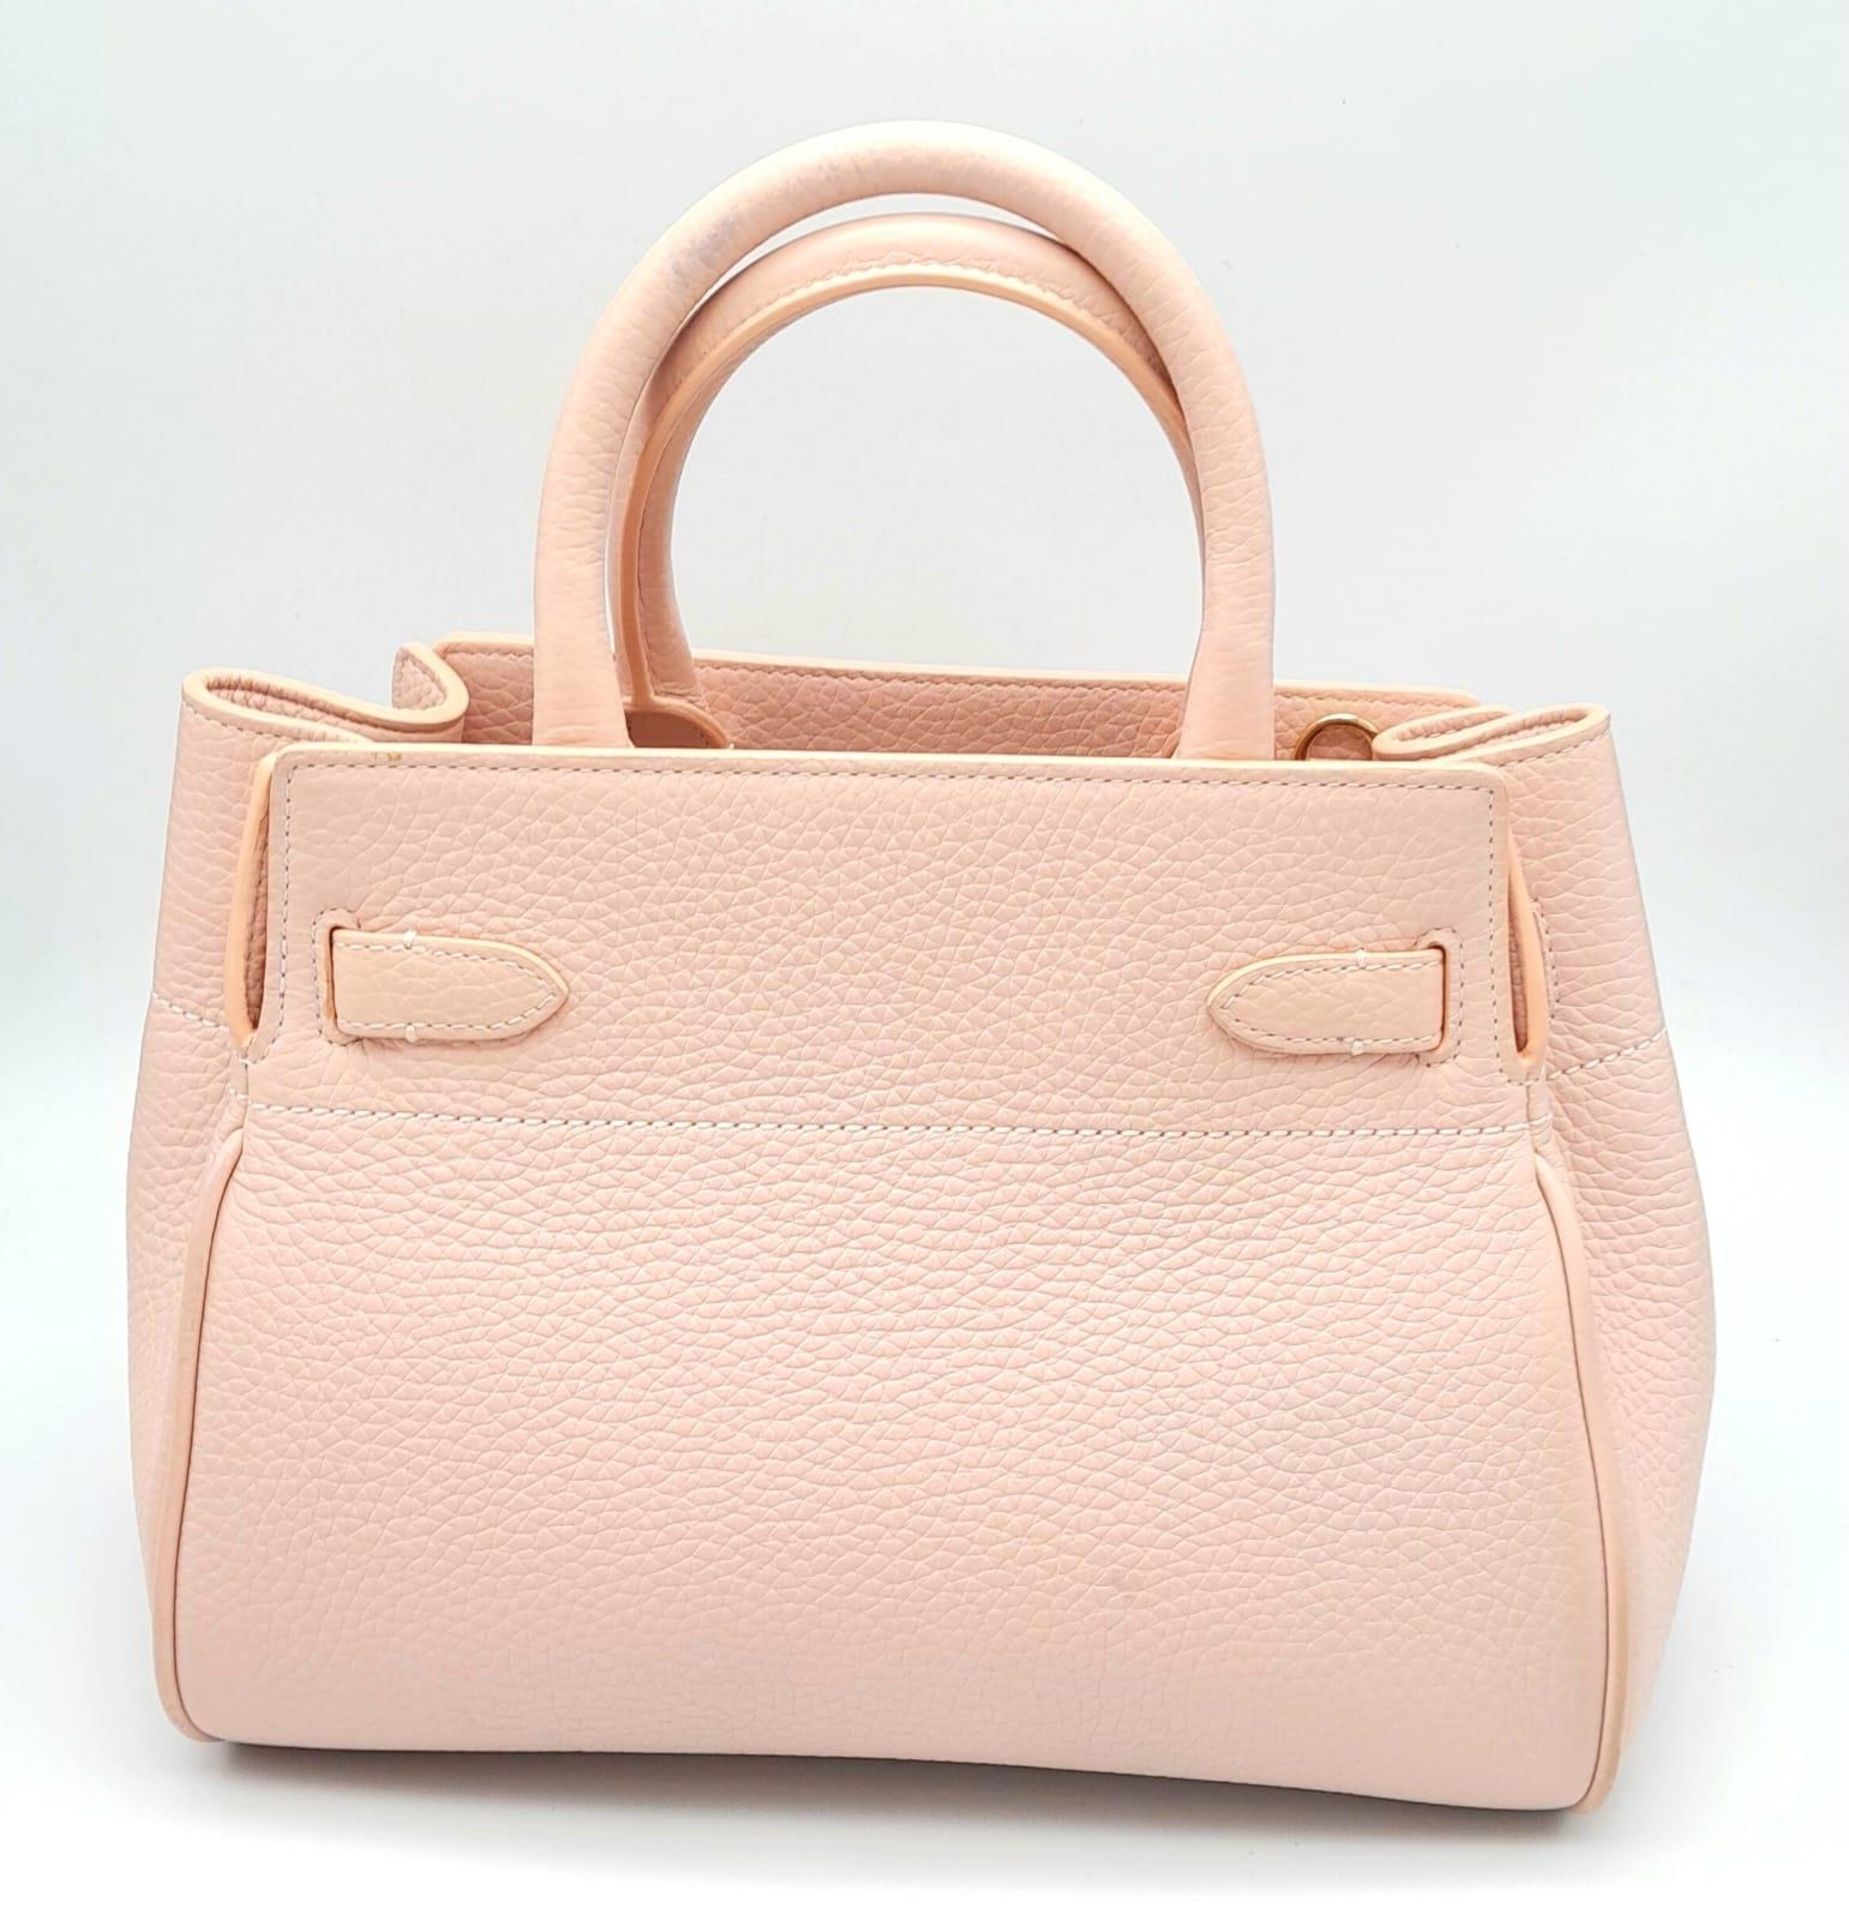 A Mulberry Small Belted Bayswater Handbag in Icy Pink Heavy Grain with Pastel Tartan Fabric - Image 3 of 5